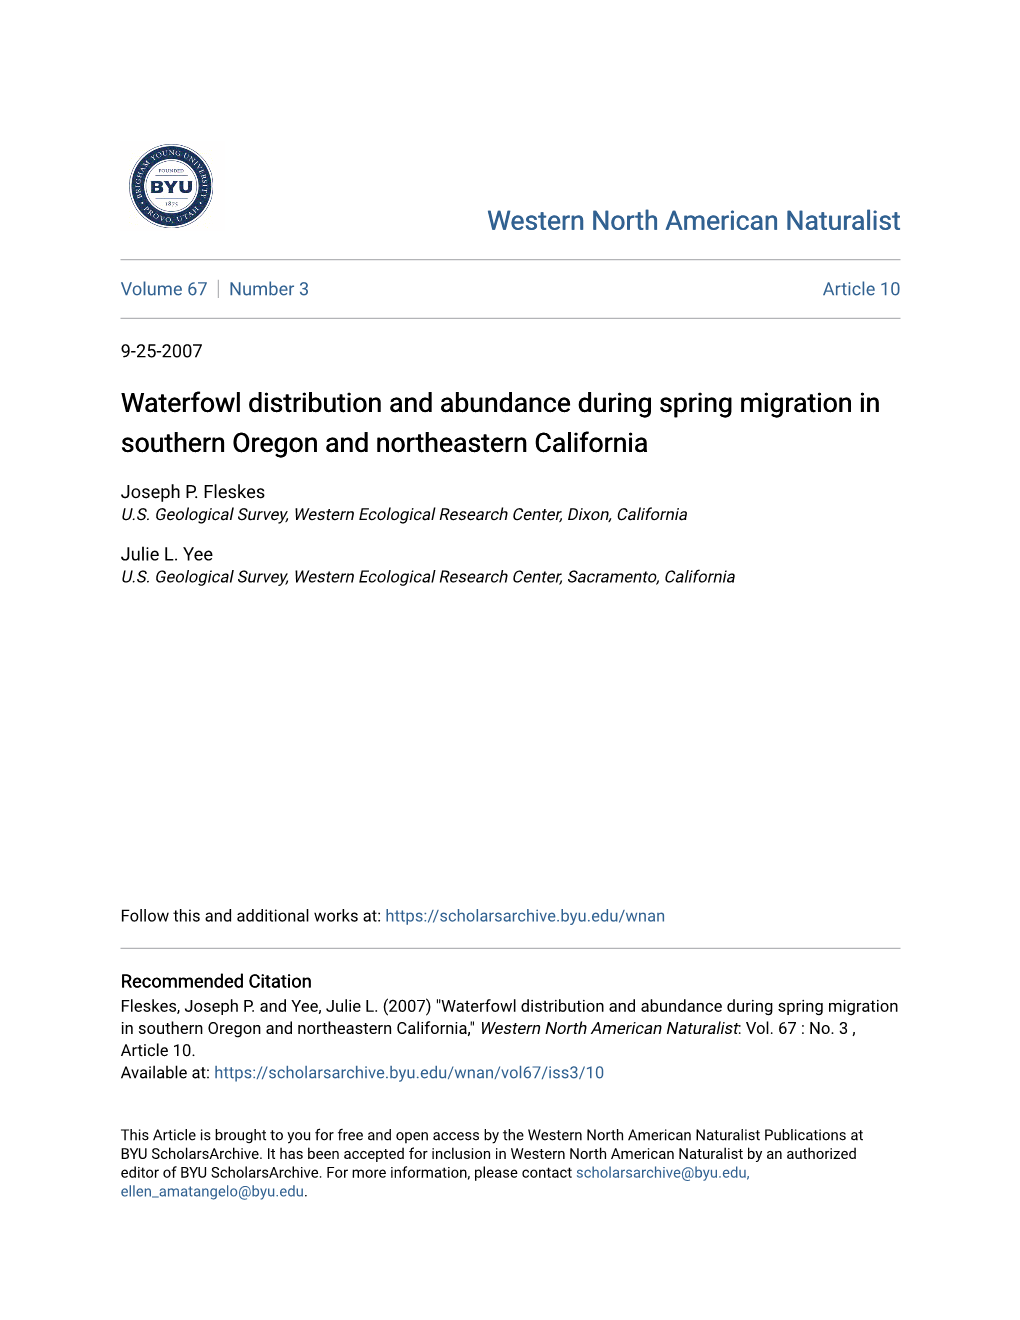 Waterfowl Distribution and Abundance During Spring Migration in Southern Oregon and Northeastern California